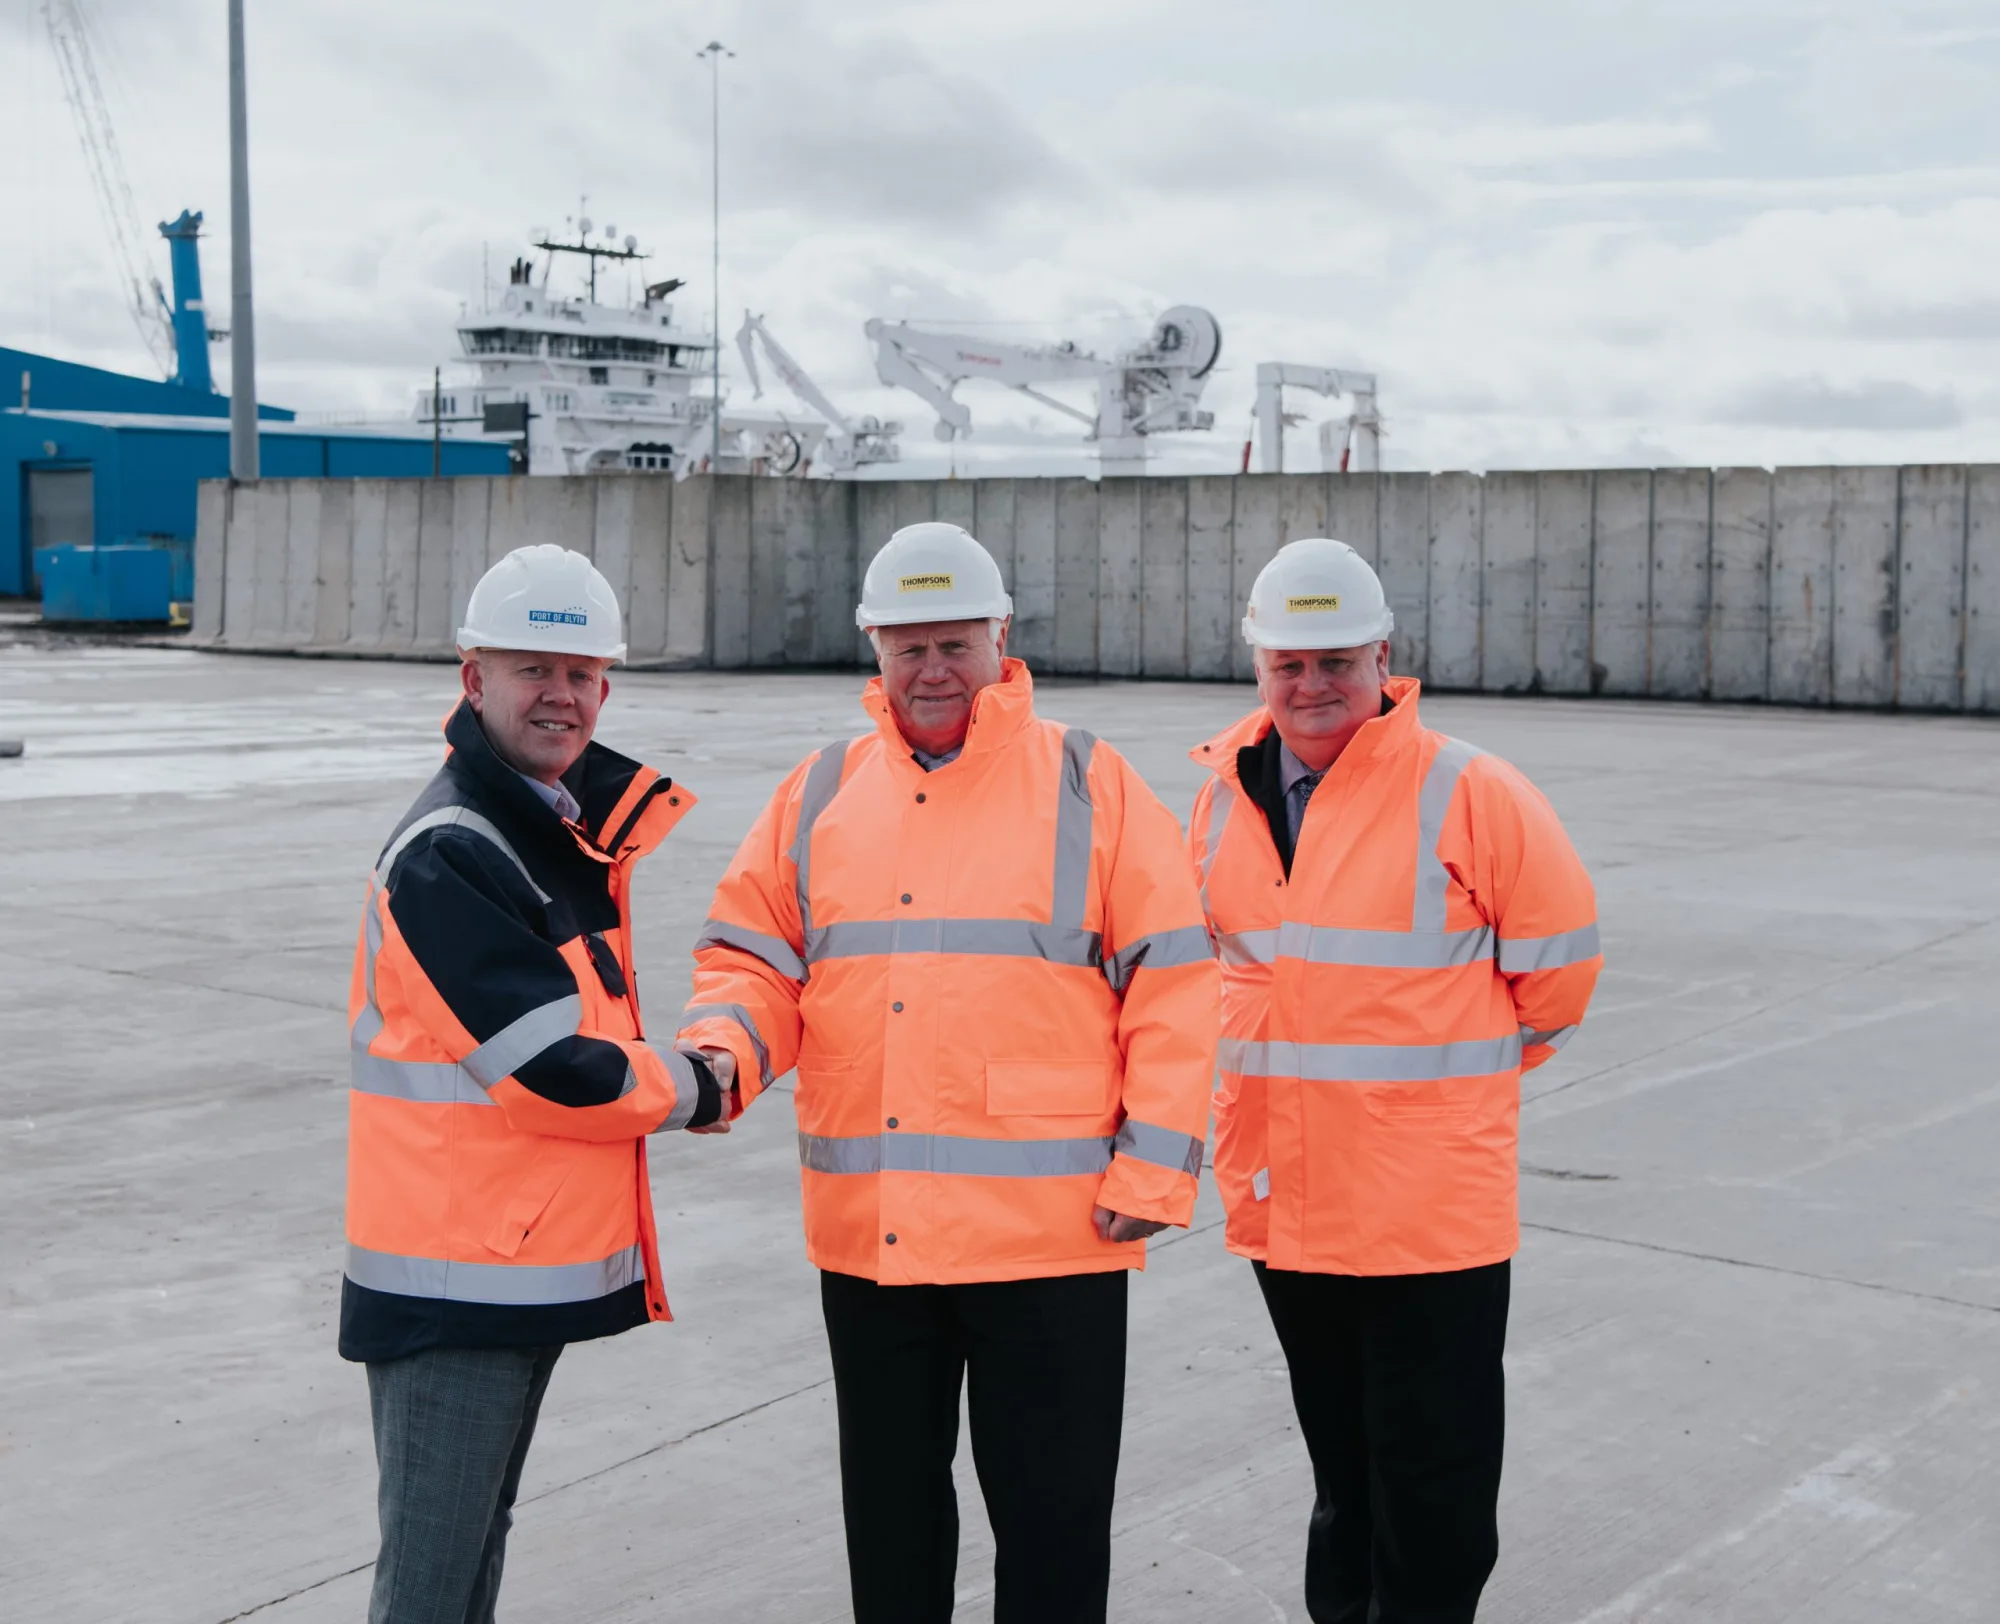 Port of Blyth & Thompsons of Prudhoe Announce Offshore Decommissioning Partnership